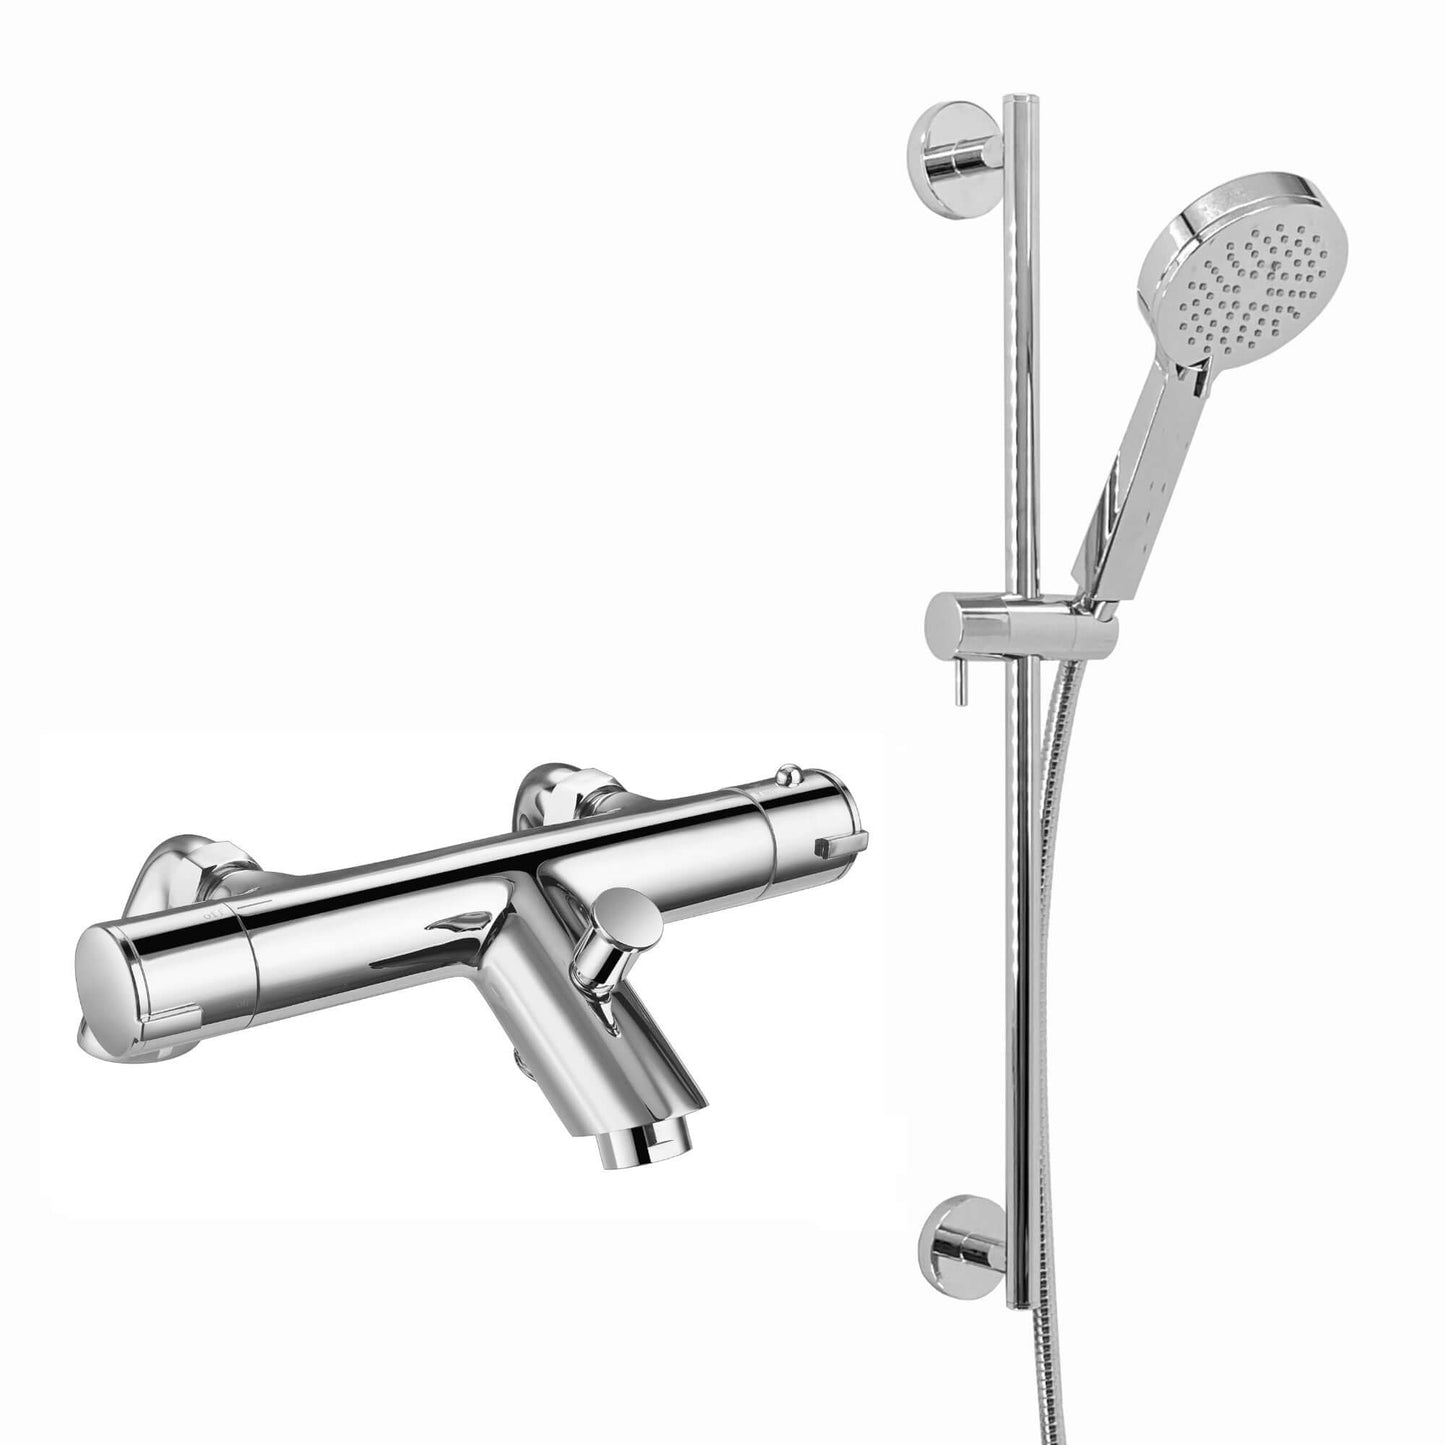 Dune modern thermostatic bath shower mixer tap deck mount with slider rail kit - chrome - Showers